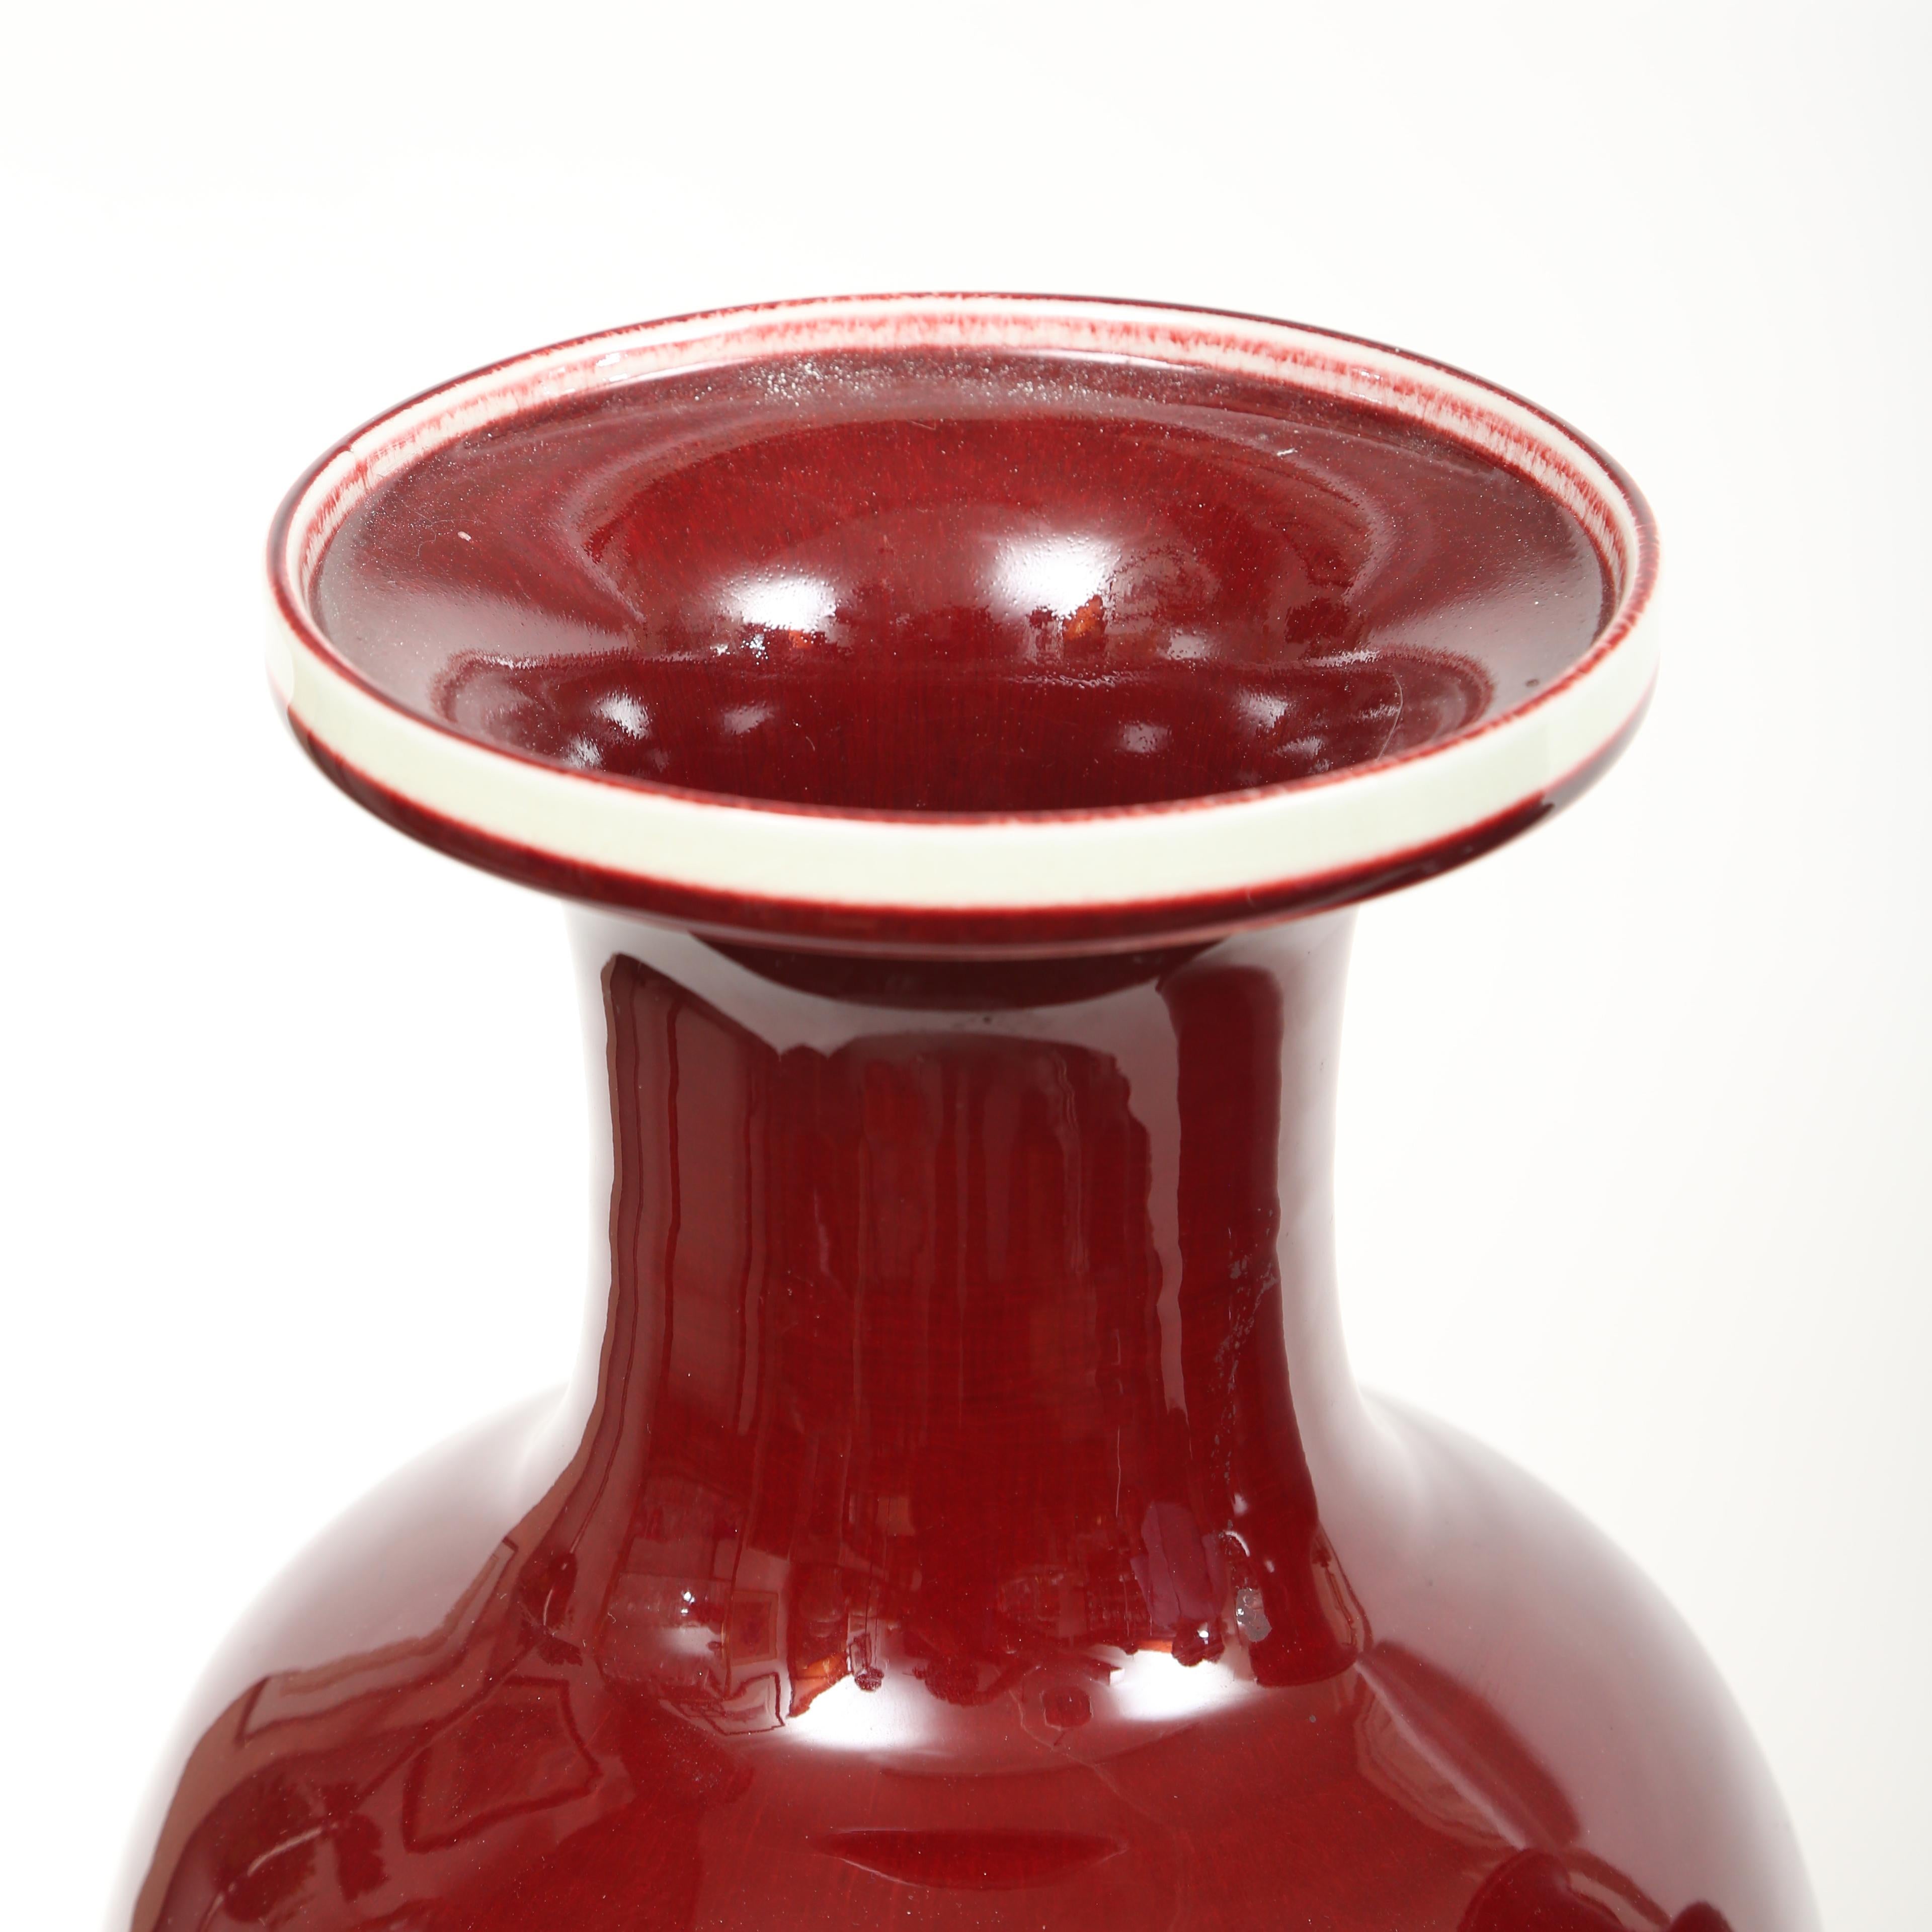 Large pair of Chinese sang de boeuf or oxblood vases. The oxblood glaze is magnificent for there is such depth and richness of color. These are hand thrown and do show some slight differences that you would expect to find in artisan made ceramics.